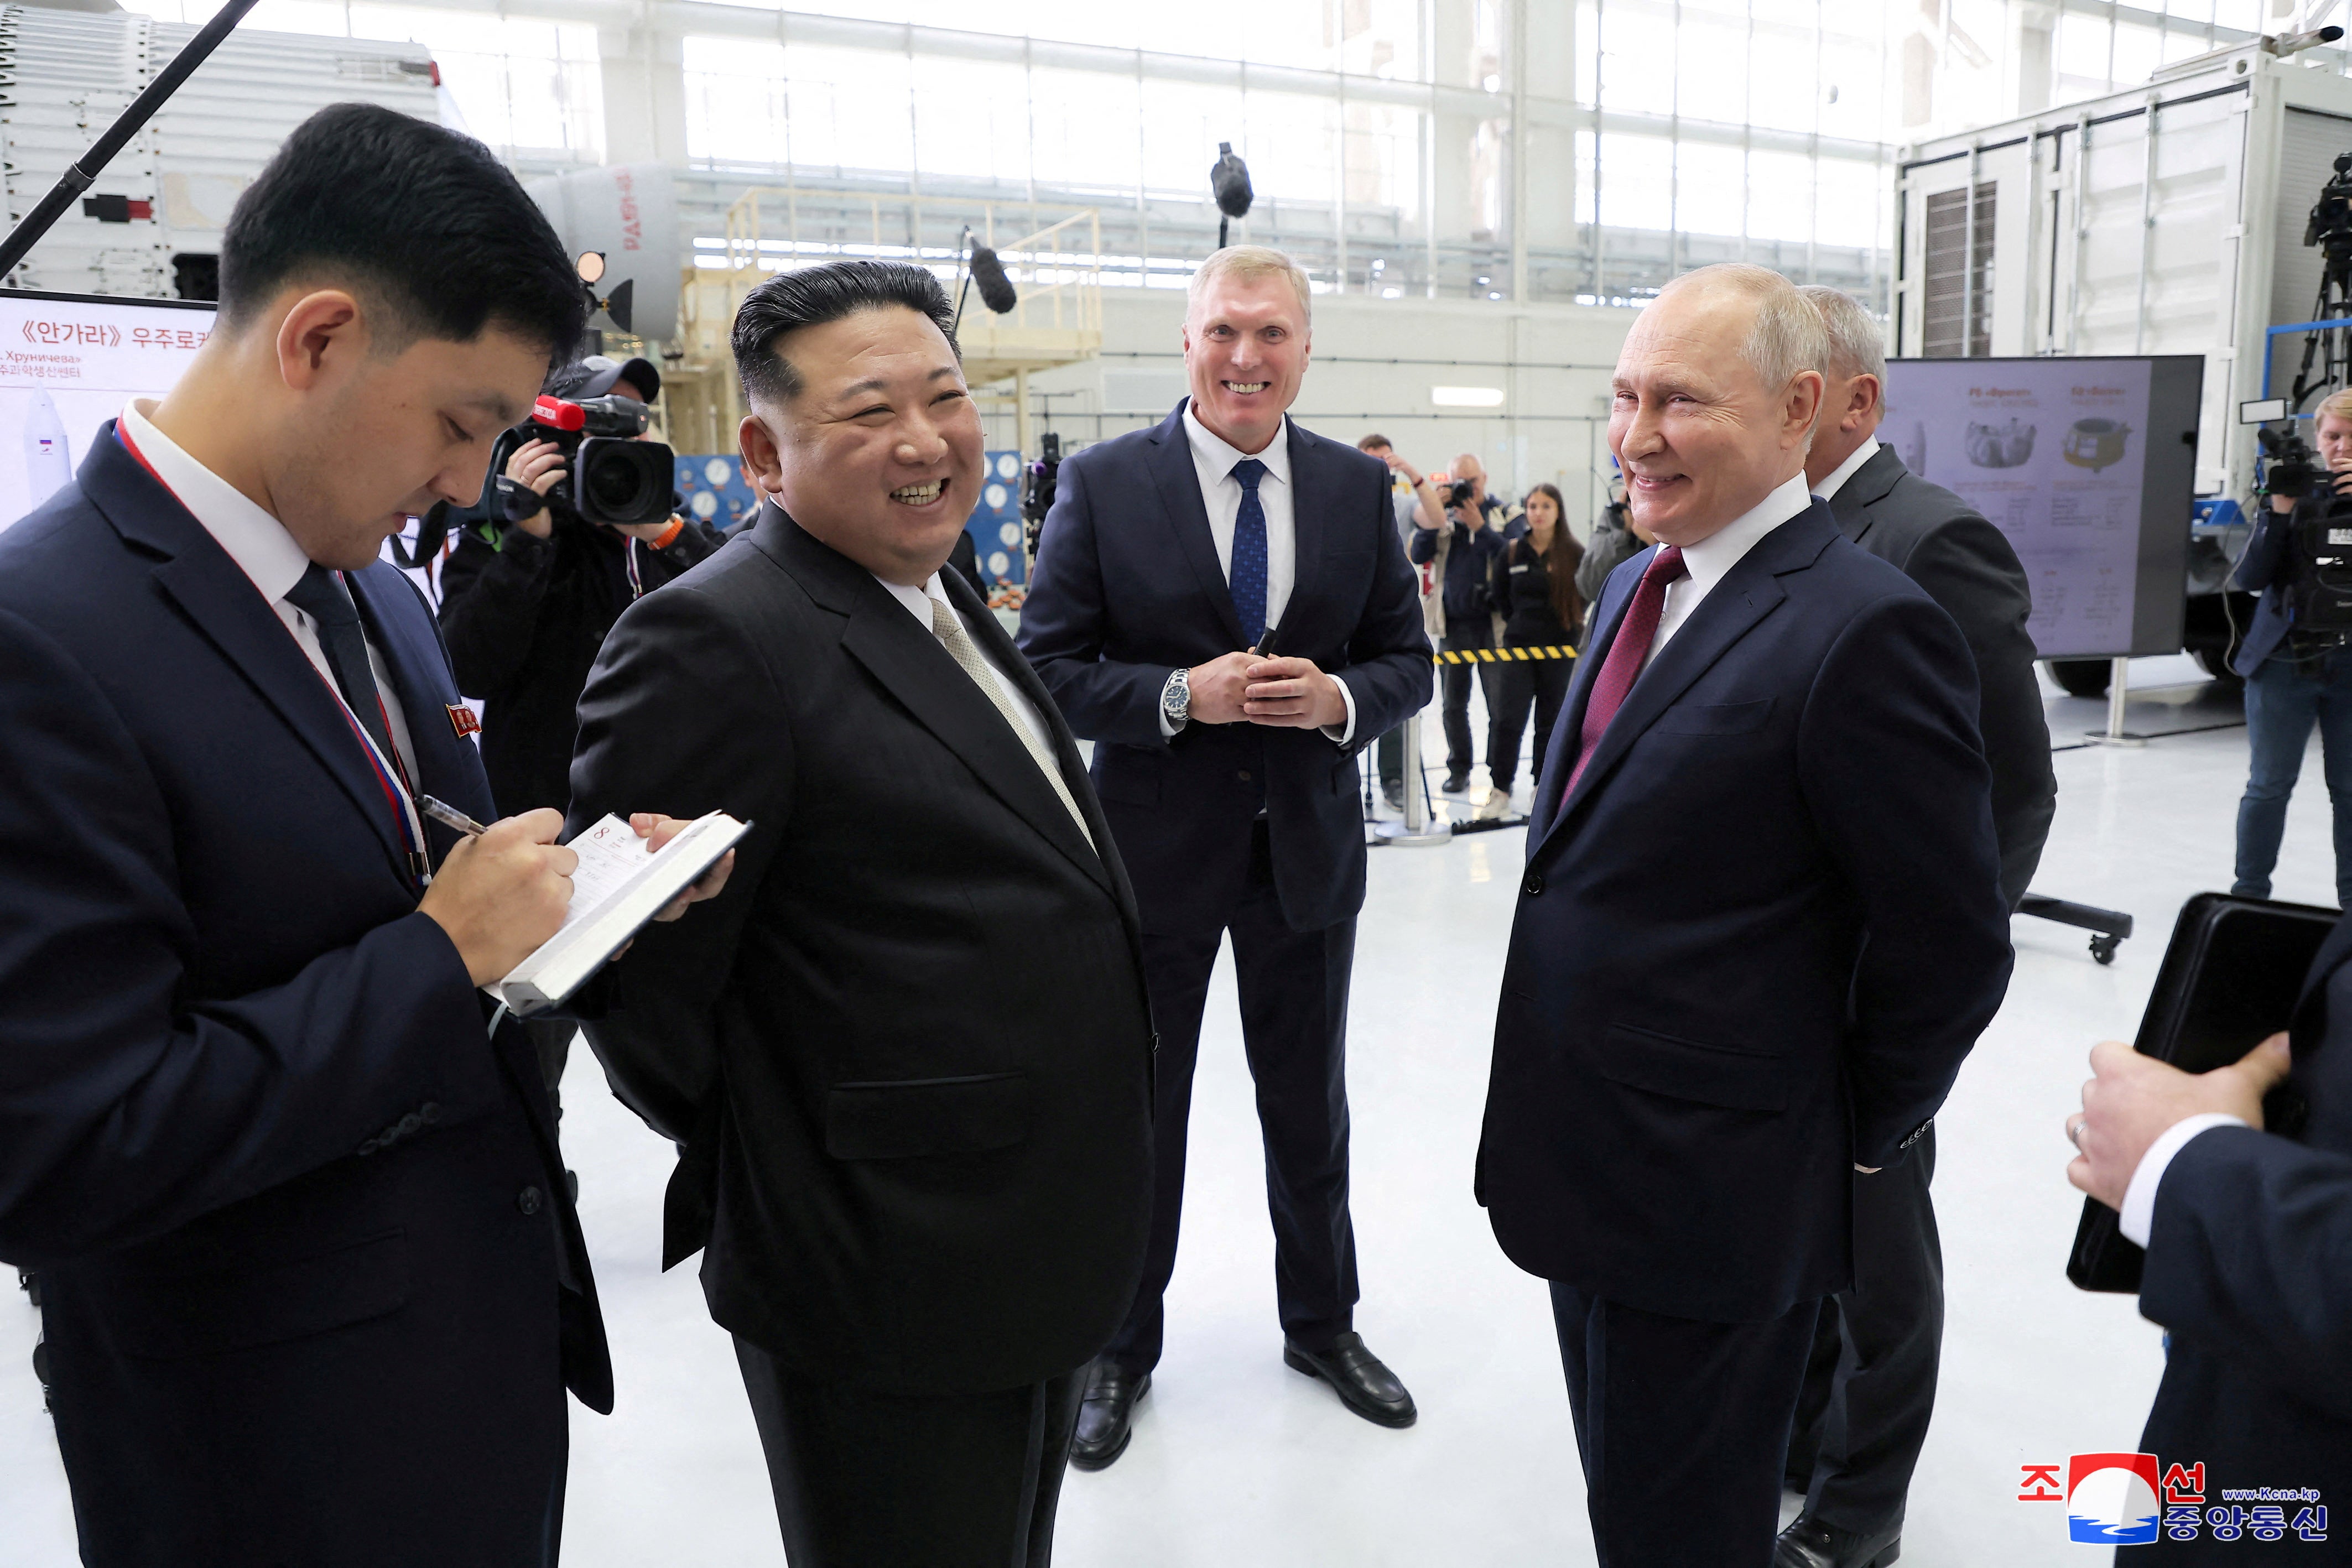 North Korean leader Kim Jong-un meets Russia’s president Vladimir Putin at the Vostochny cosmodrome in the Amur Oblast of the Far East Region, Russia on 13 September